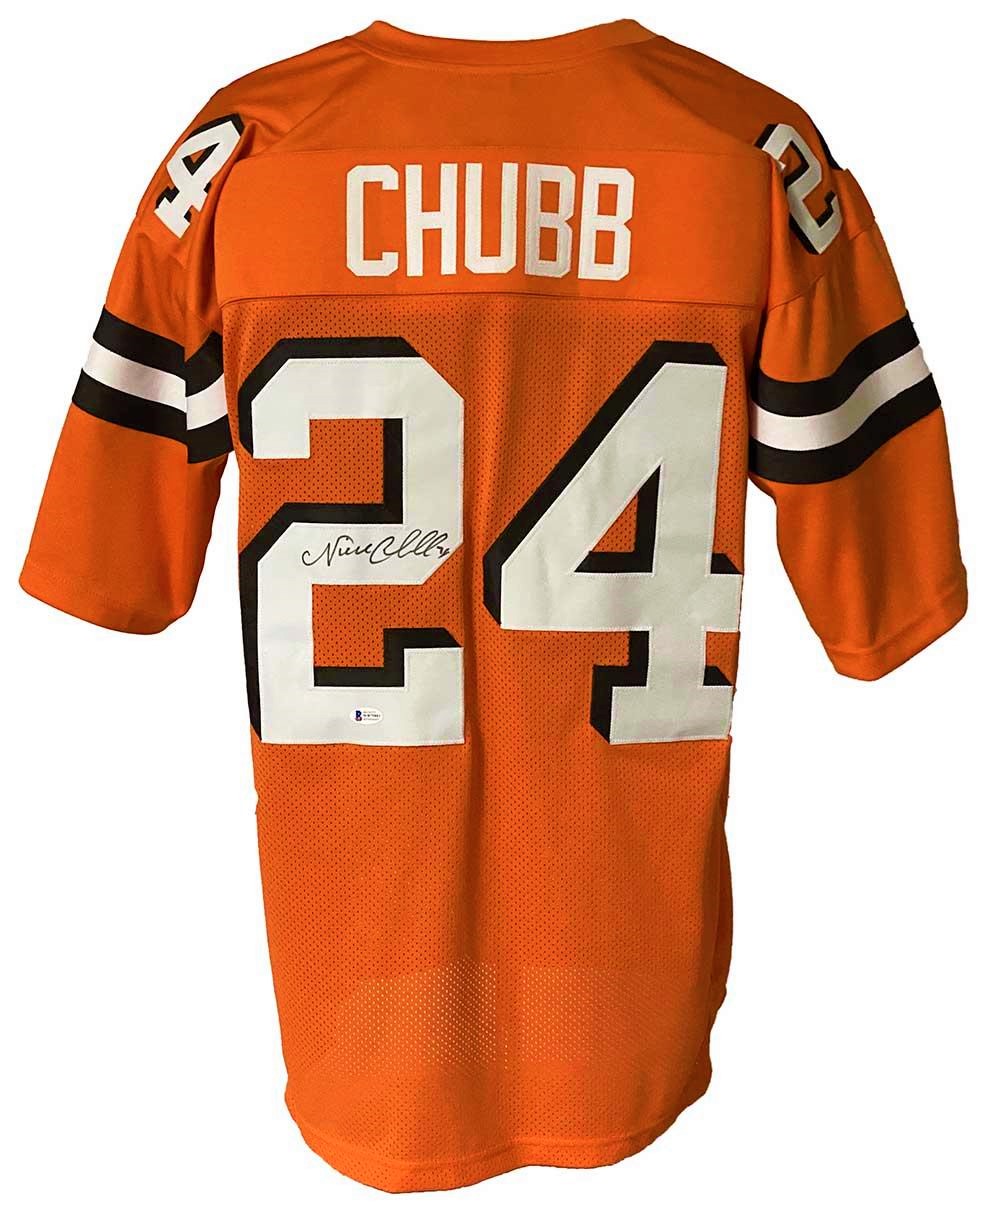 Cleveland Browns Nick Chubb Autographed Pro Style Orange Jersey BECKETT Authenticated ...